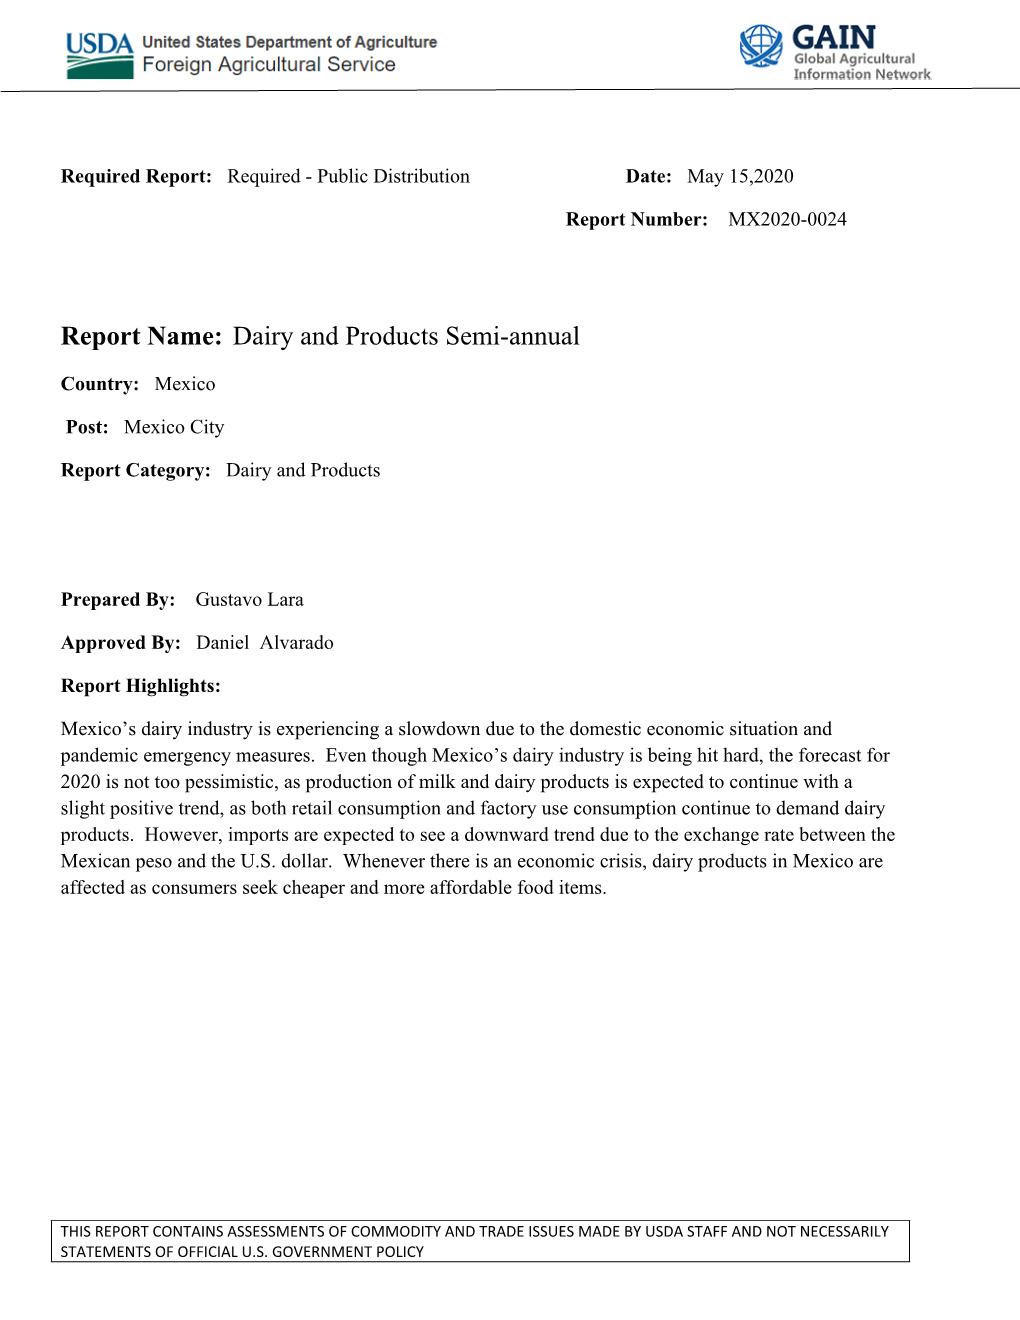 Report Name: Dairy and Products Semi-Annual